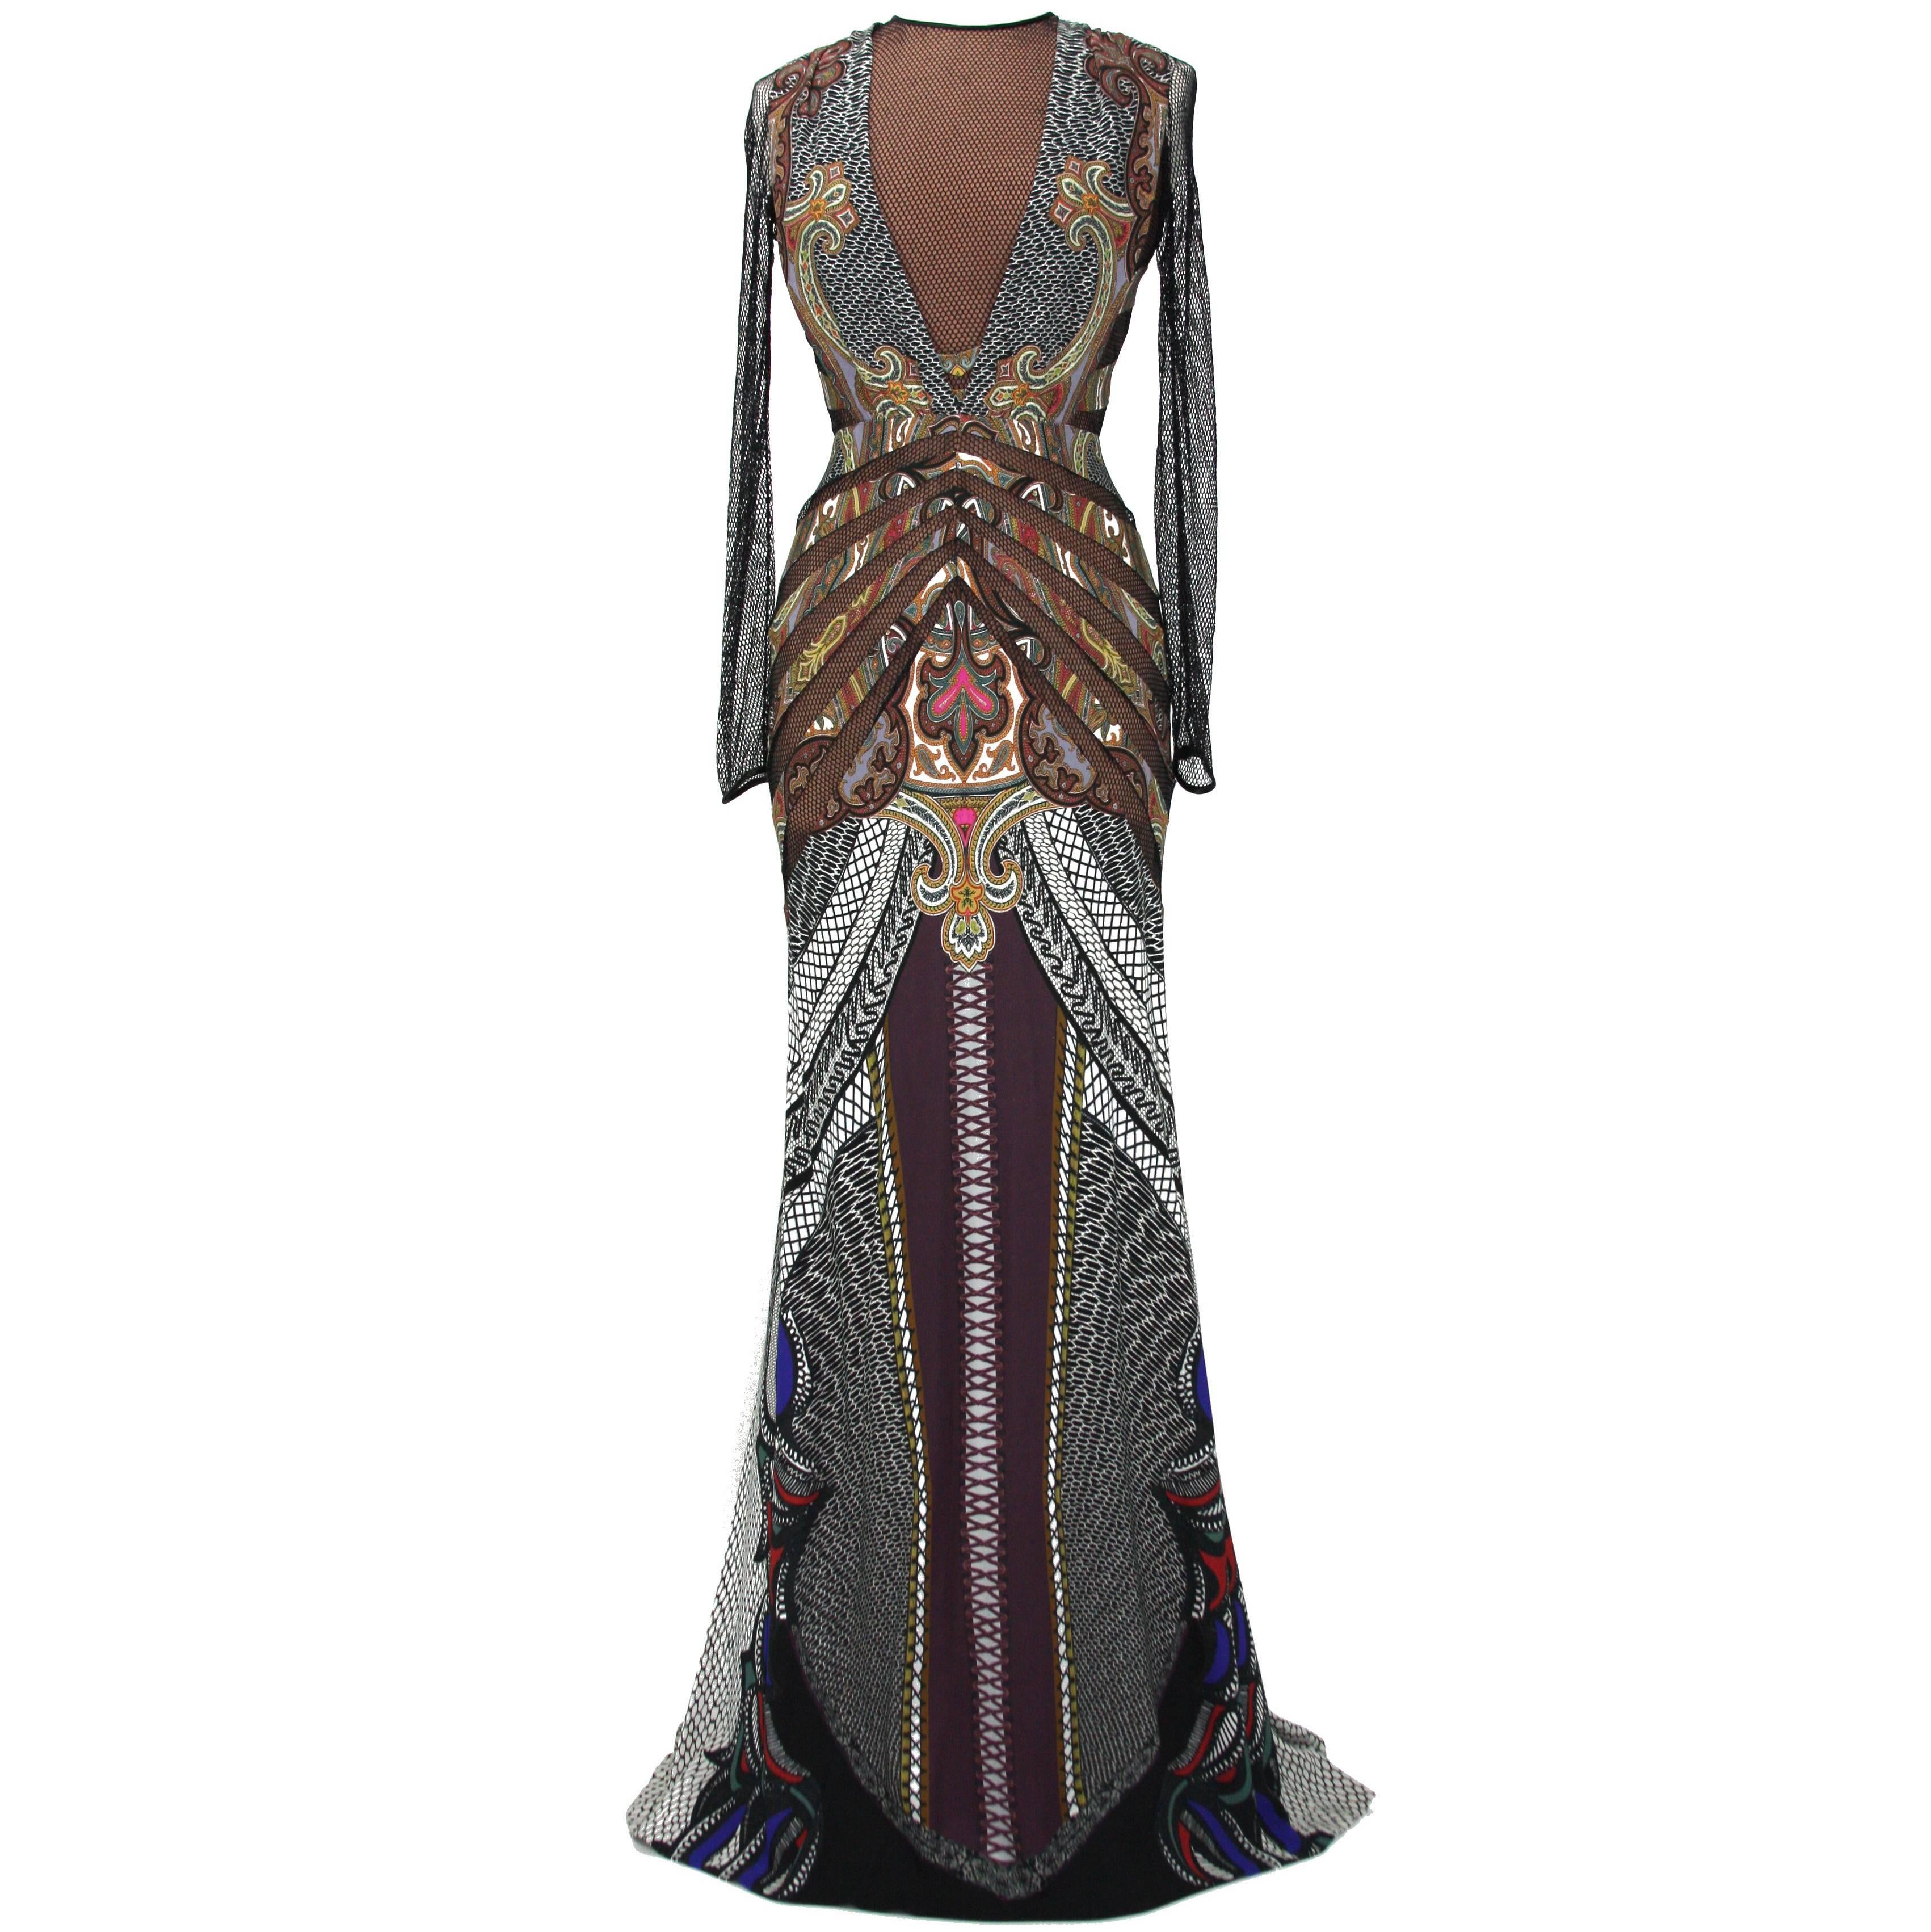 New $5780 ETRO Runway Printed Stretch Dress Gown with Mesh Details It 42 - US 6